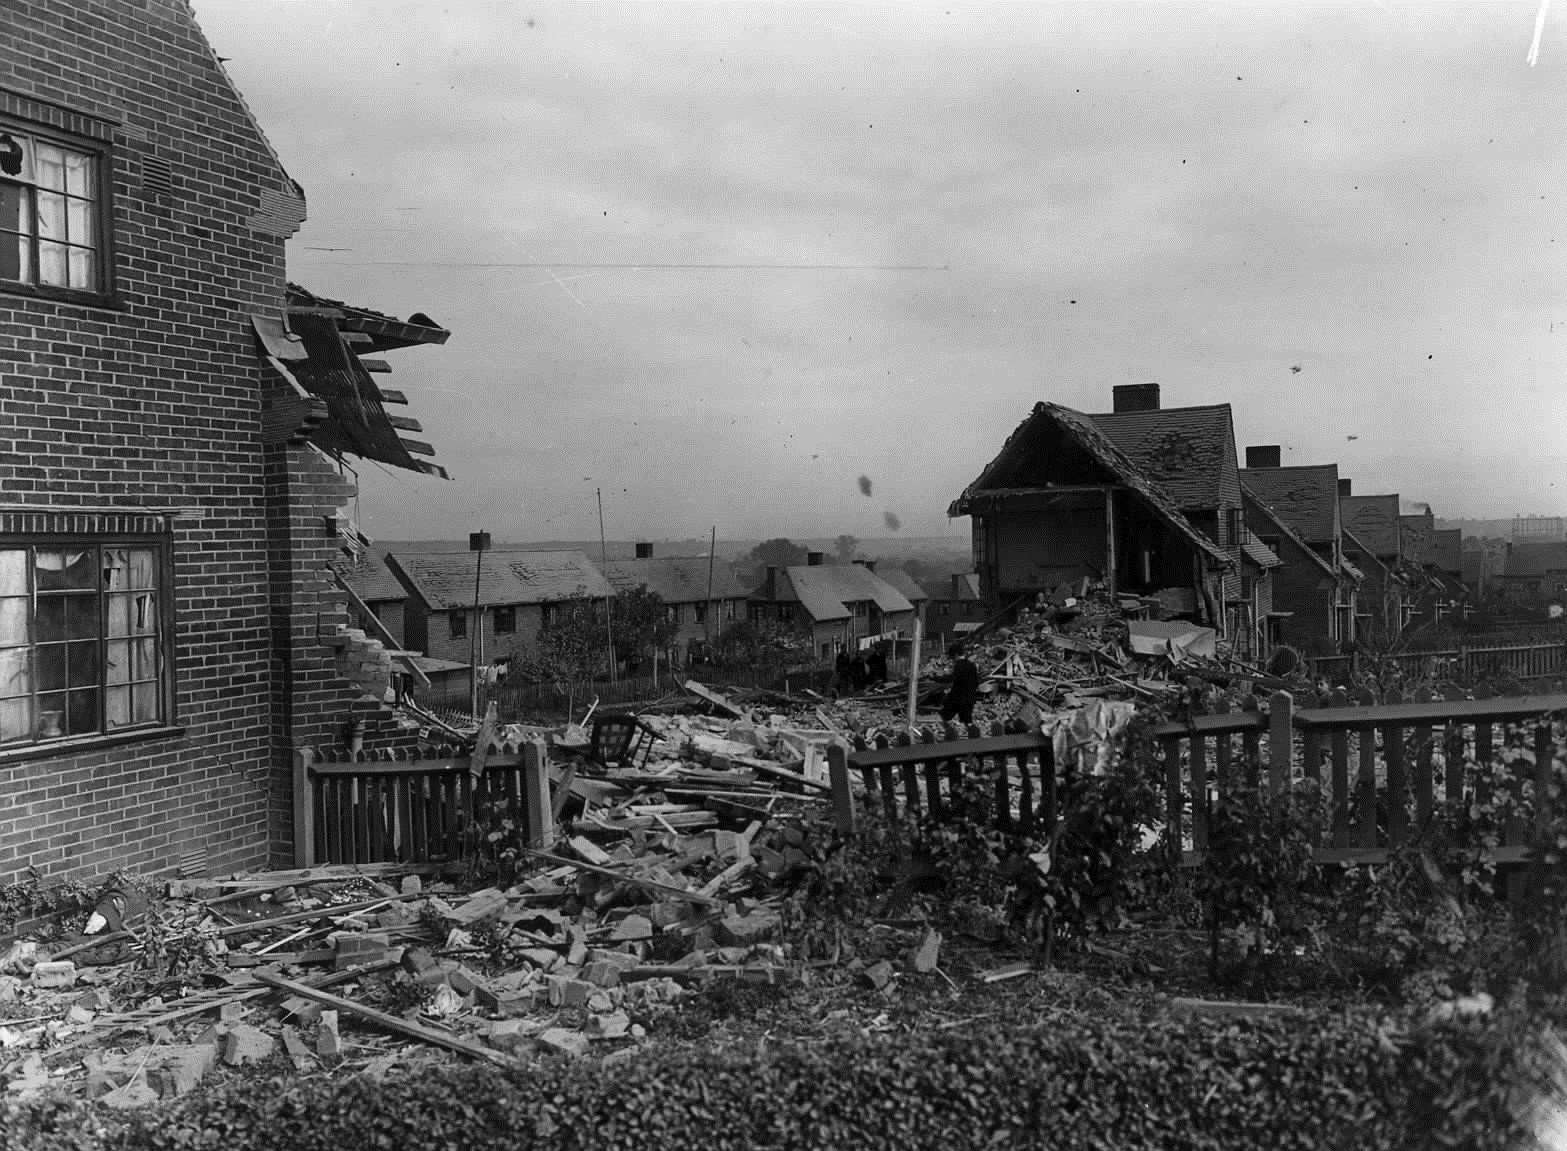 Houses on the Thanington estate were also destroyed